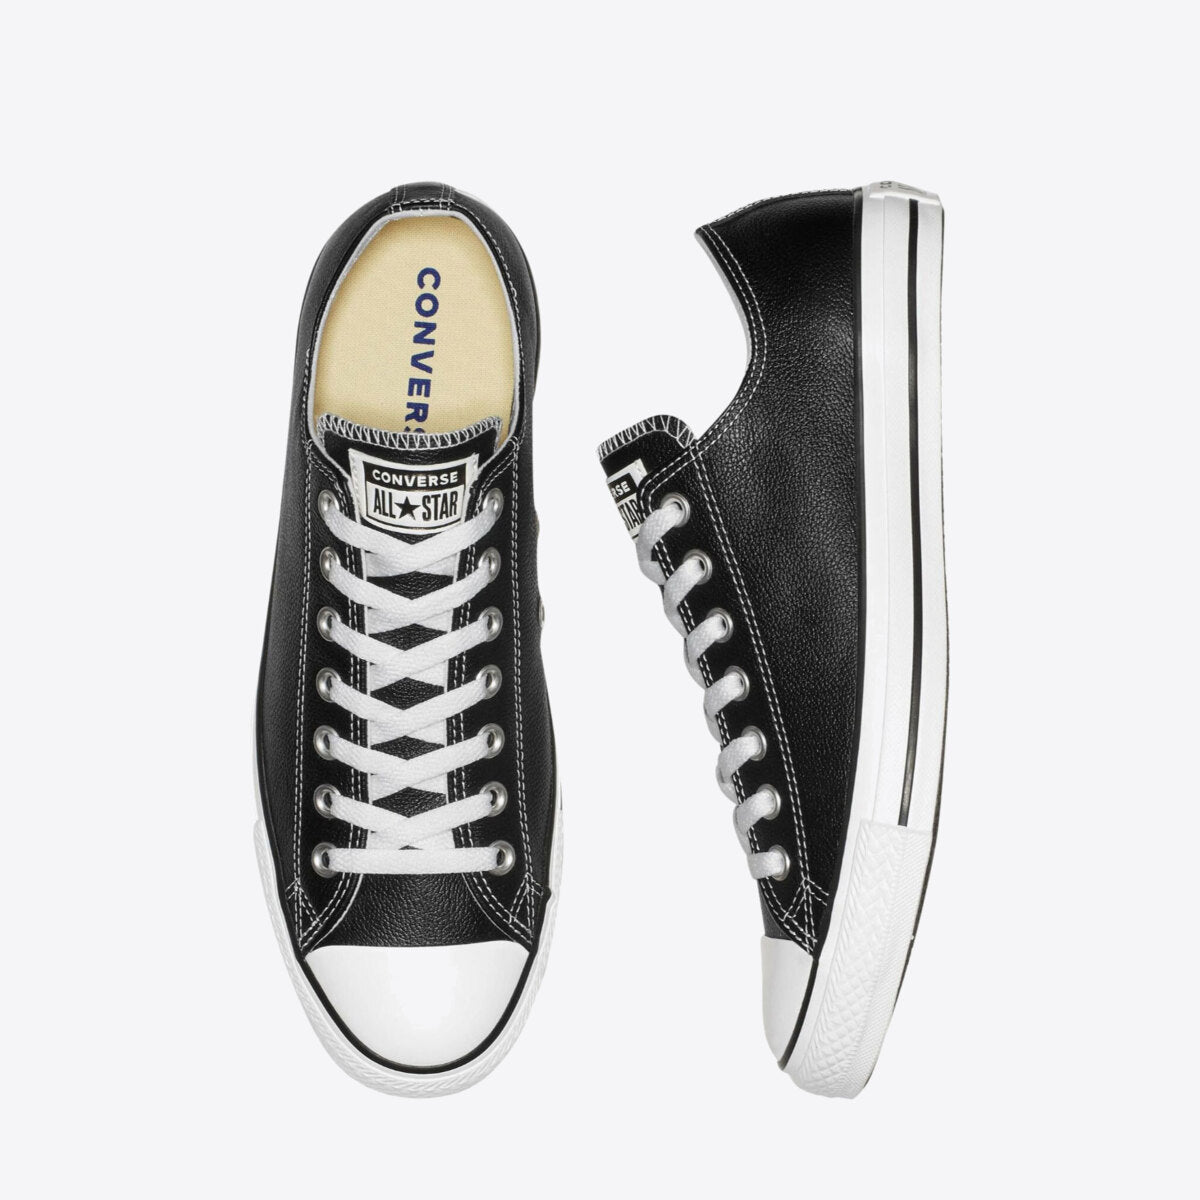 CONVERSE Chuck Taylor All Star Leather Low Black - Image 4